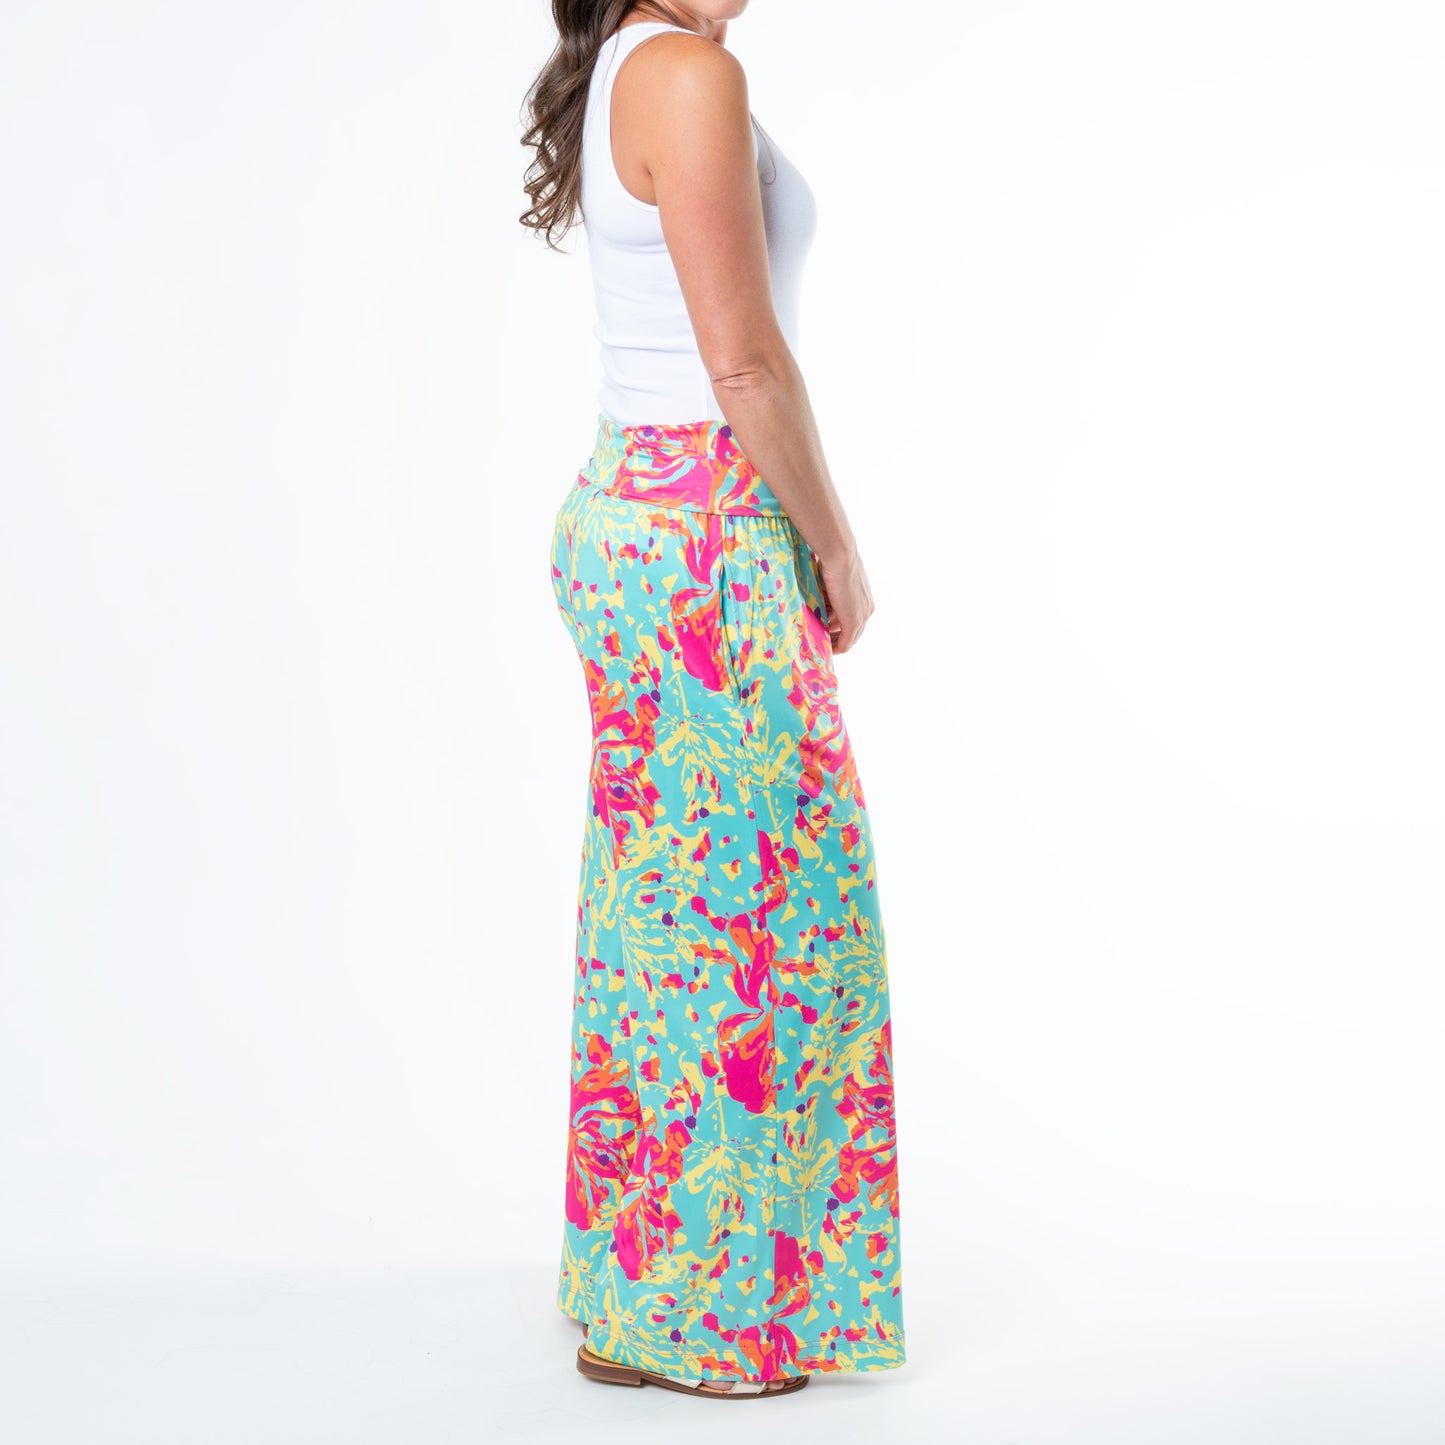 Zola Wide Leg Palazzo Pant with Tummy Control Top